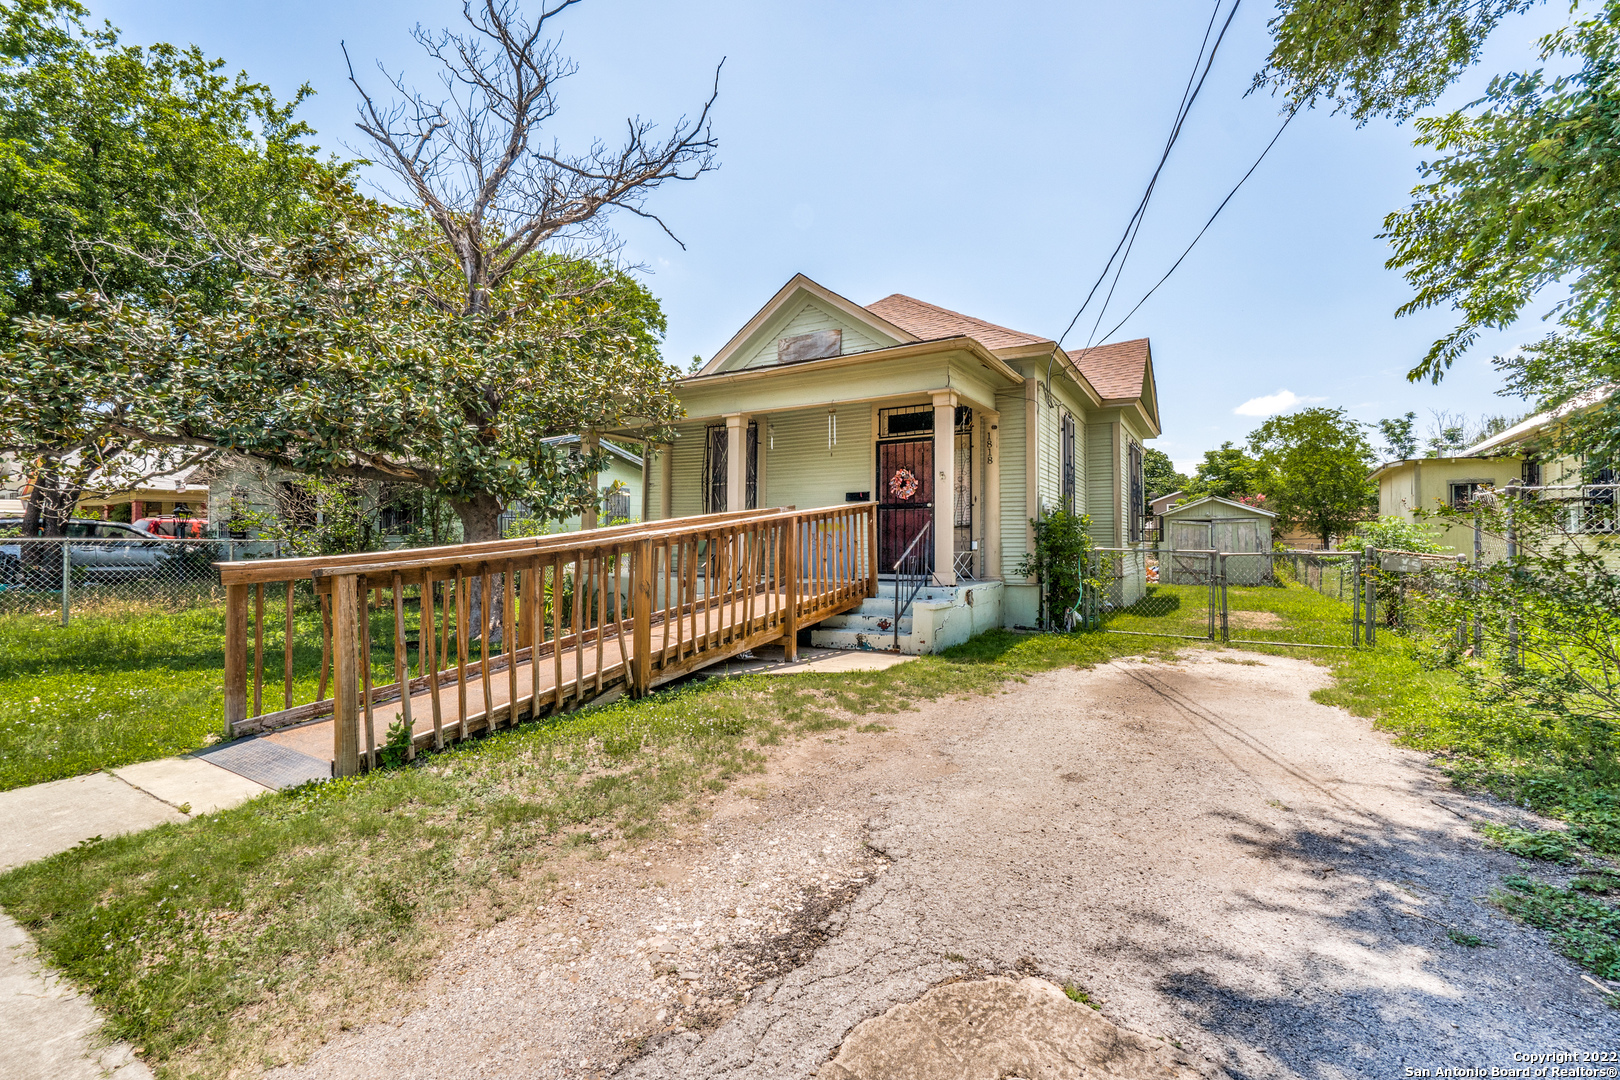 ***Showings to start MONDAY MAY16th*** This investment property is minutes away from UTSA's Downtown campus and has easy access to all major highways. Home offers 3 Bedrooms, 1 Full Bath, 12 ft. ceilings, detached garage and a large backyard. Property being SOLD AS IS.